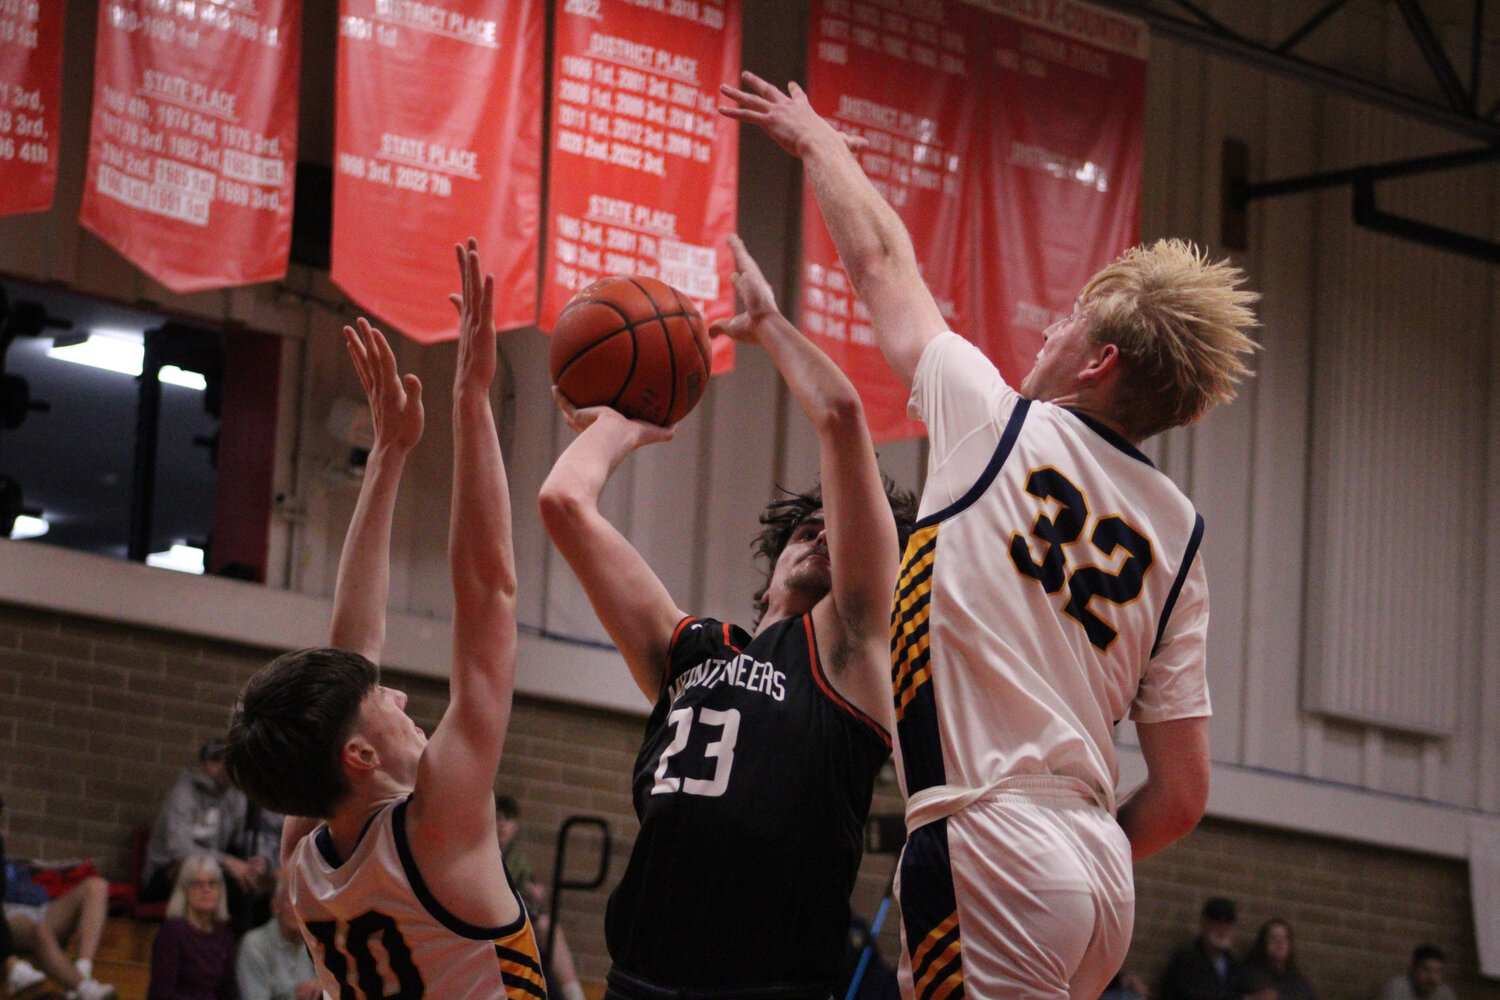 Jared Sprouffske endures contact from two Adna defenders to lay in a shot on Feb. 9.